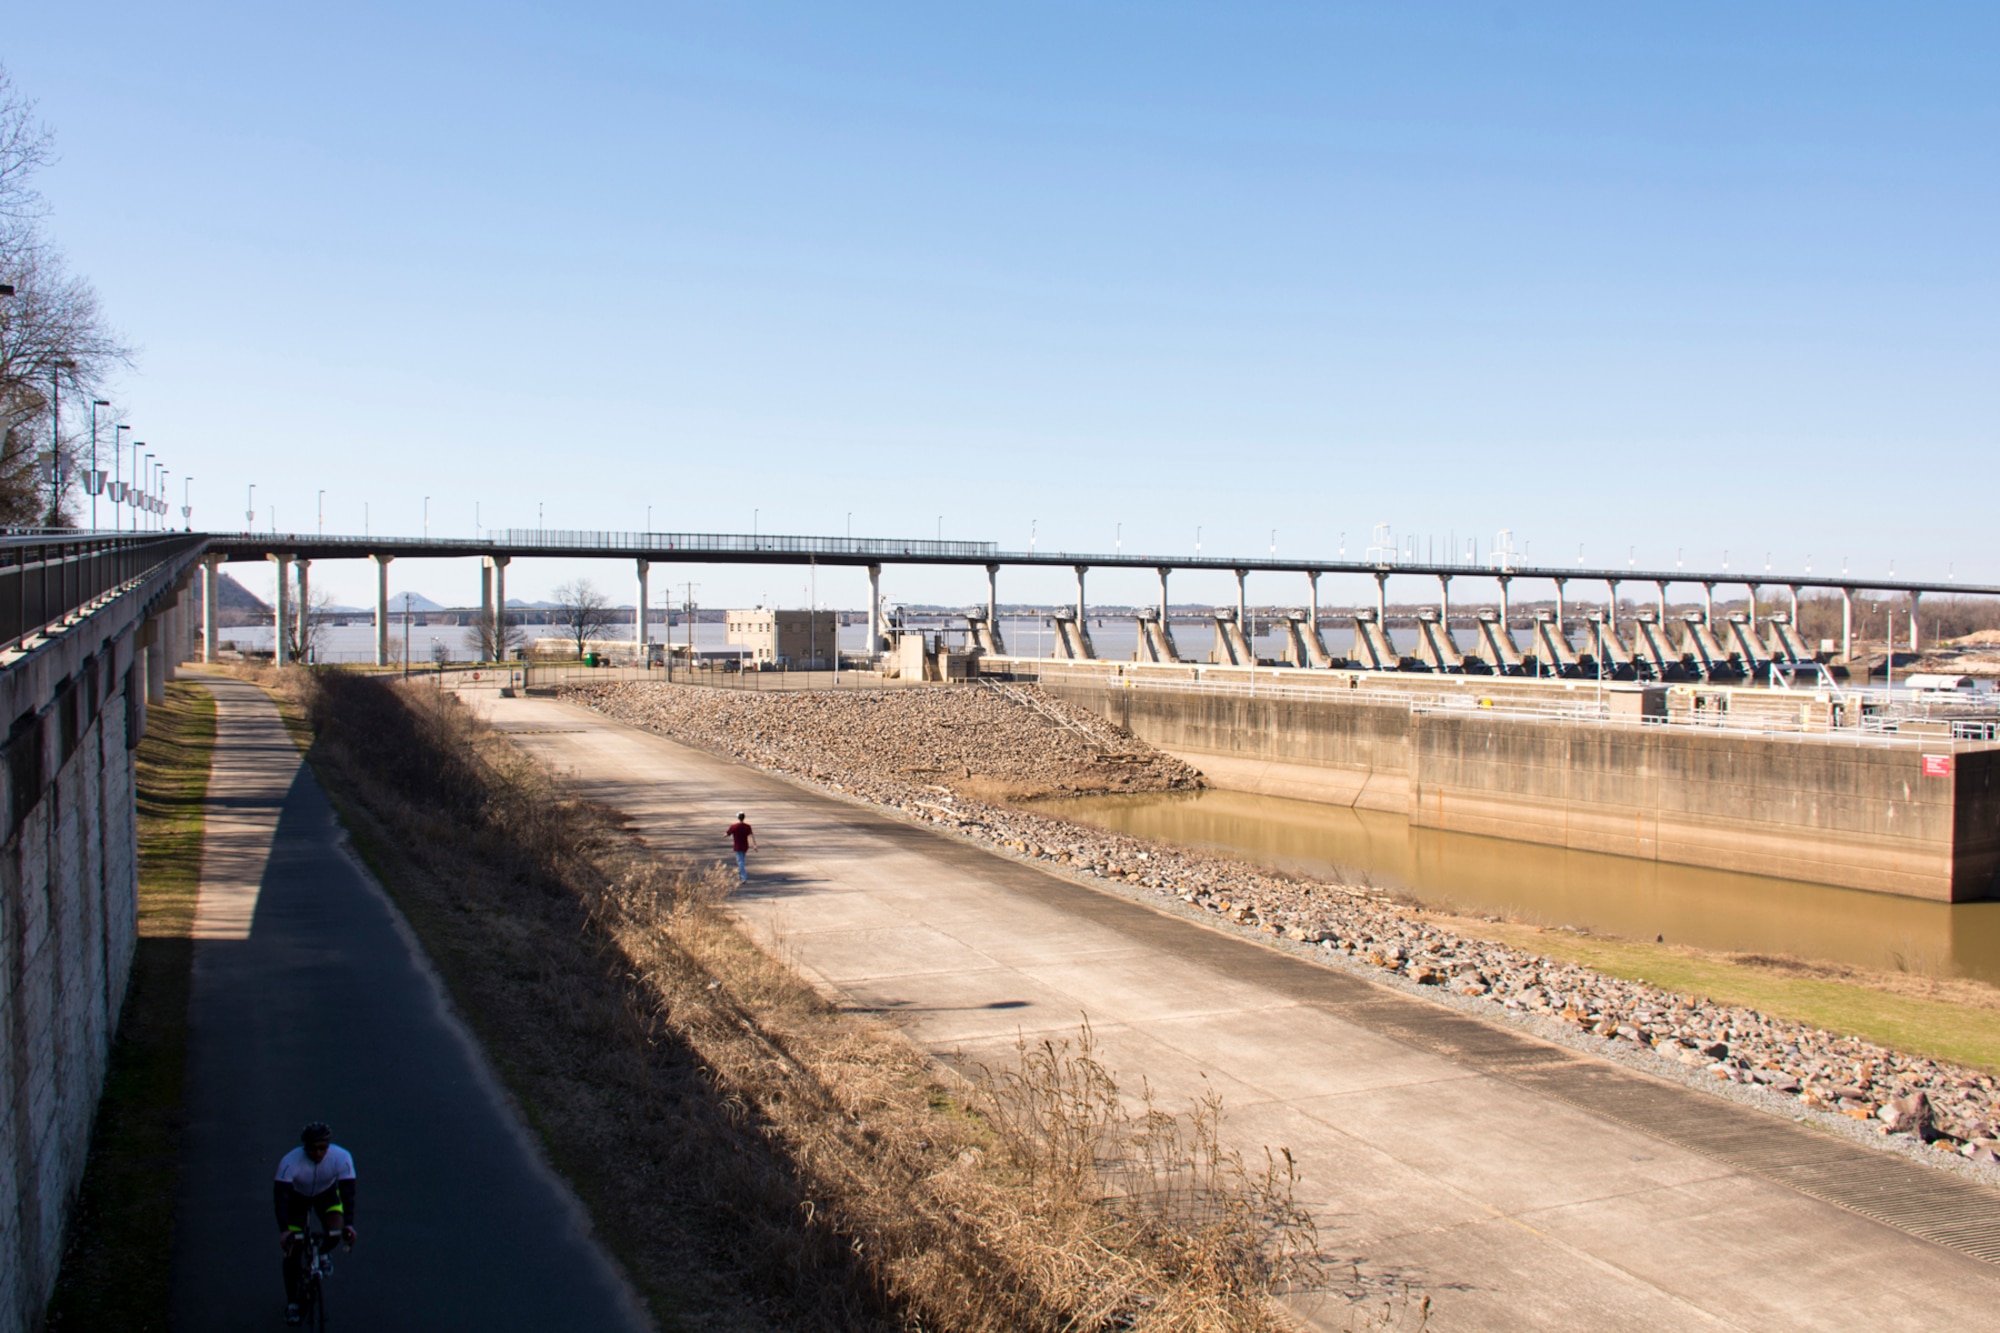 Outdoor enthusiasts in Little Rock, Ark., enjoy the longest purpose-built pedestrian/bicycle bridge in the world Feb. 27, 2016. From conception to completion the project took eight years, at a cost of $16.5 million. (Courtesy photo by Jeff Walston)